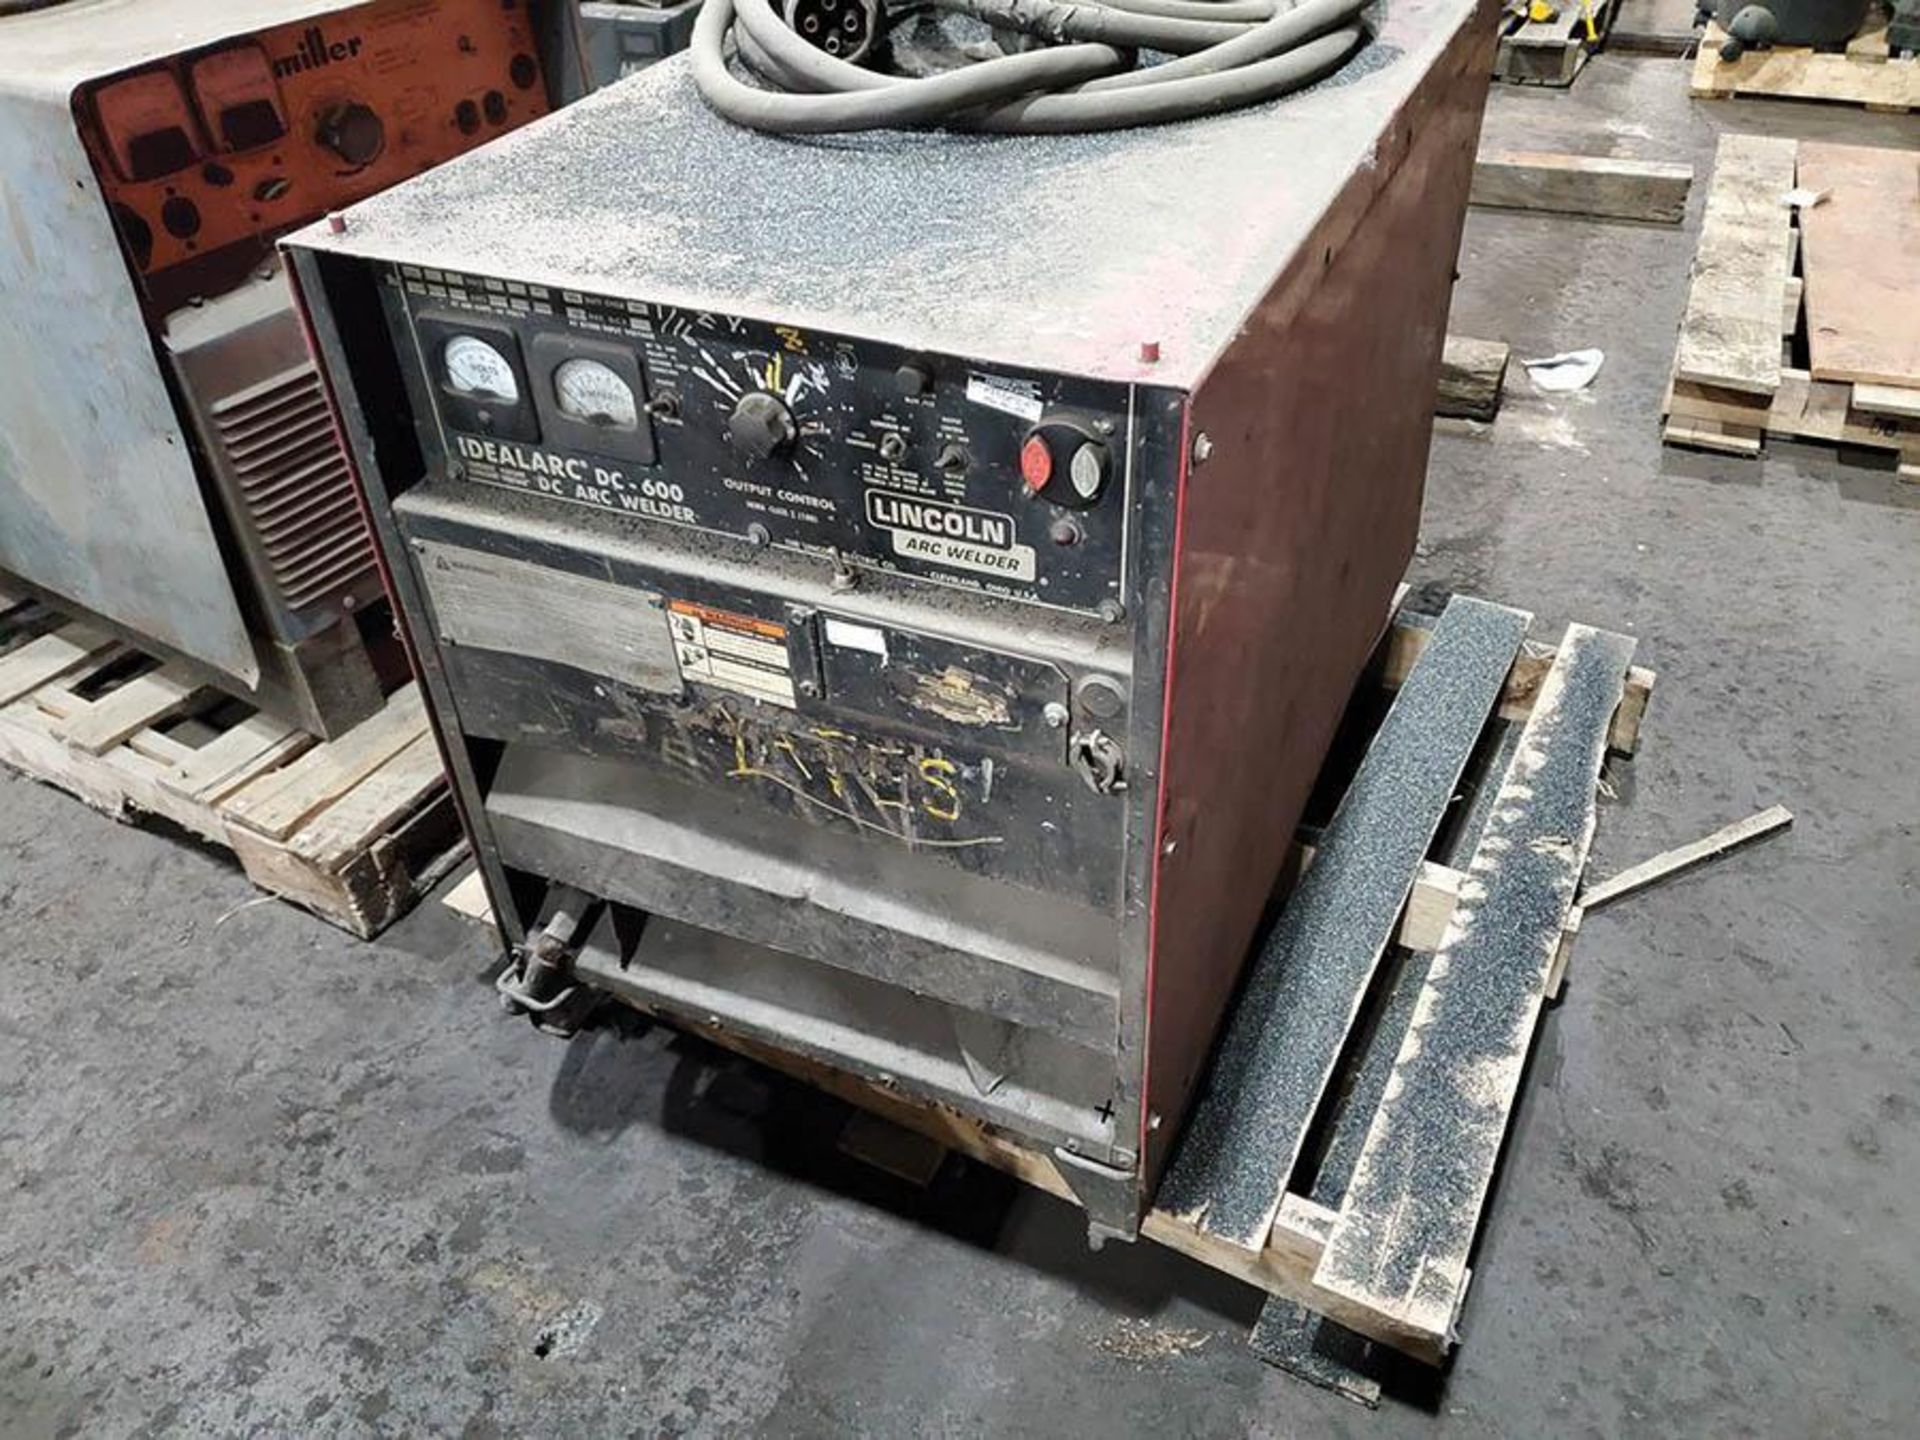 LINCOLN IDEALARC 600 WELDING POWER SUPPLY - Image 2 of 3